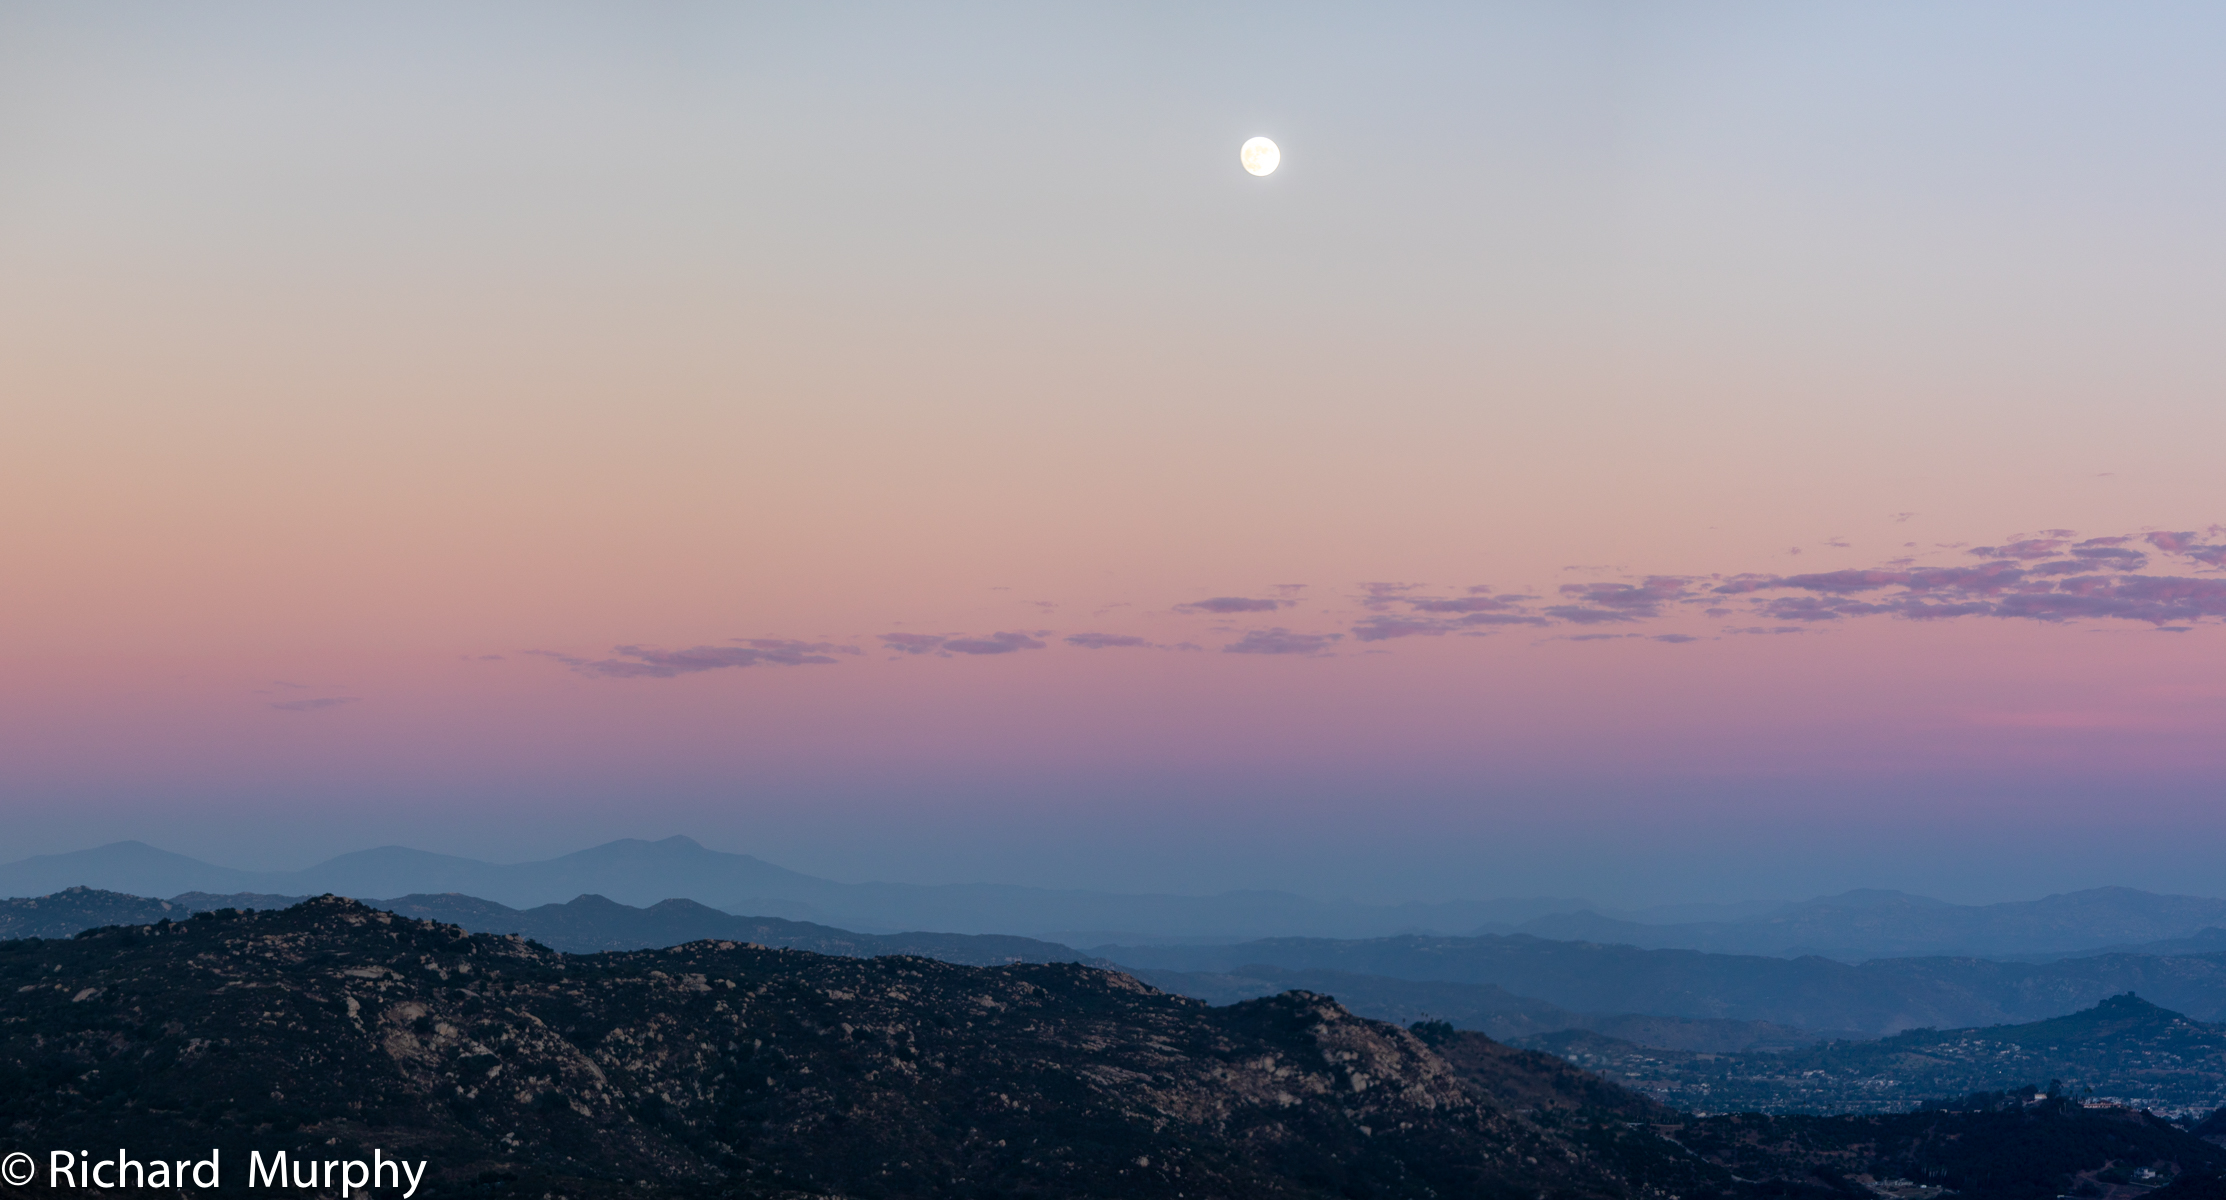 The sky just after sunset with streaks of blue, purple, red, orange, and the moon over head. The colors spread out over the low hills in east San Diego County.